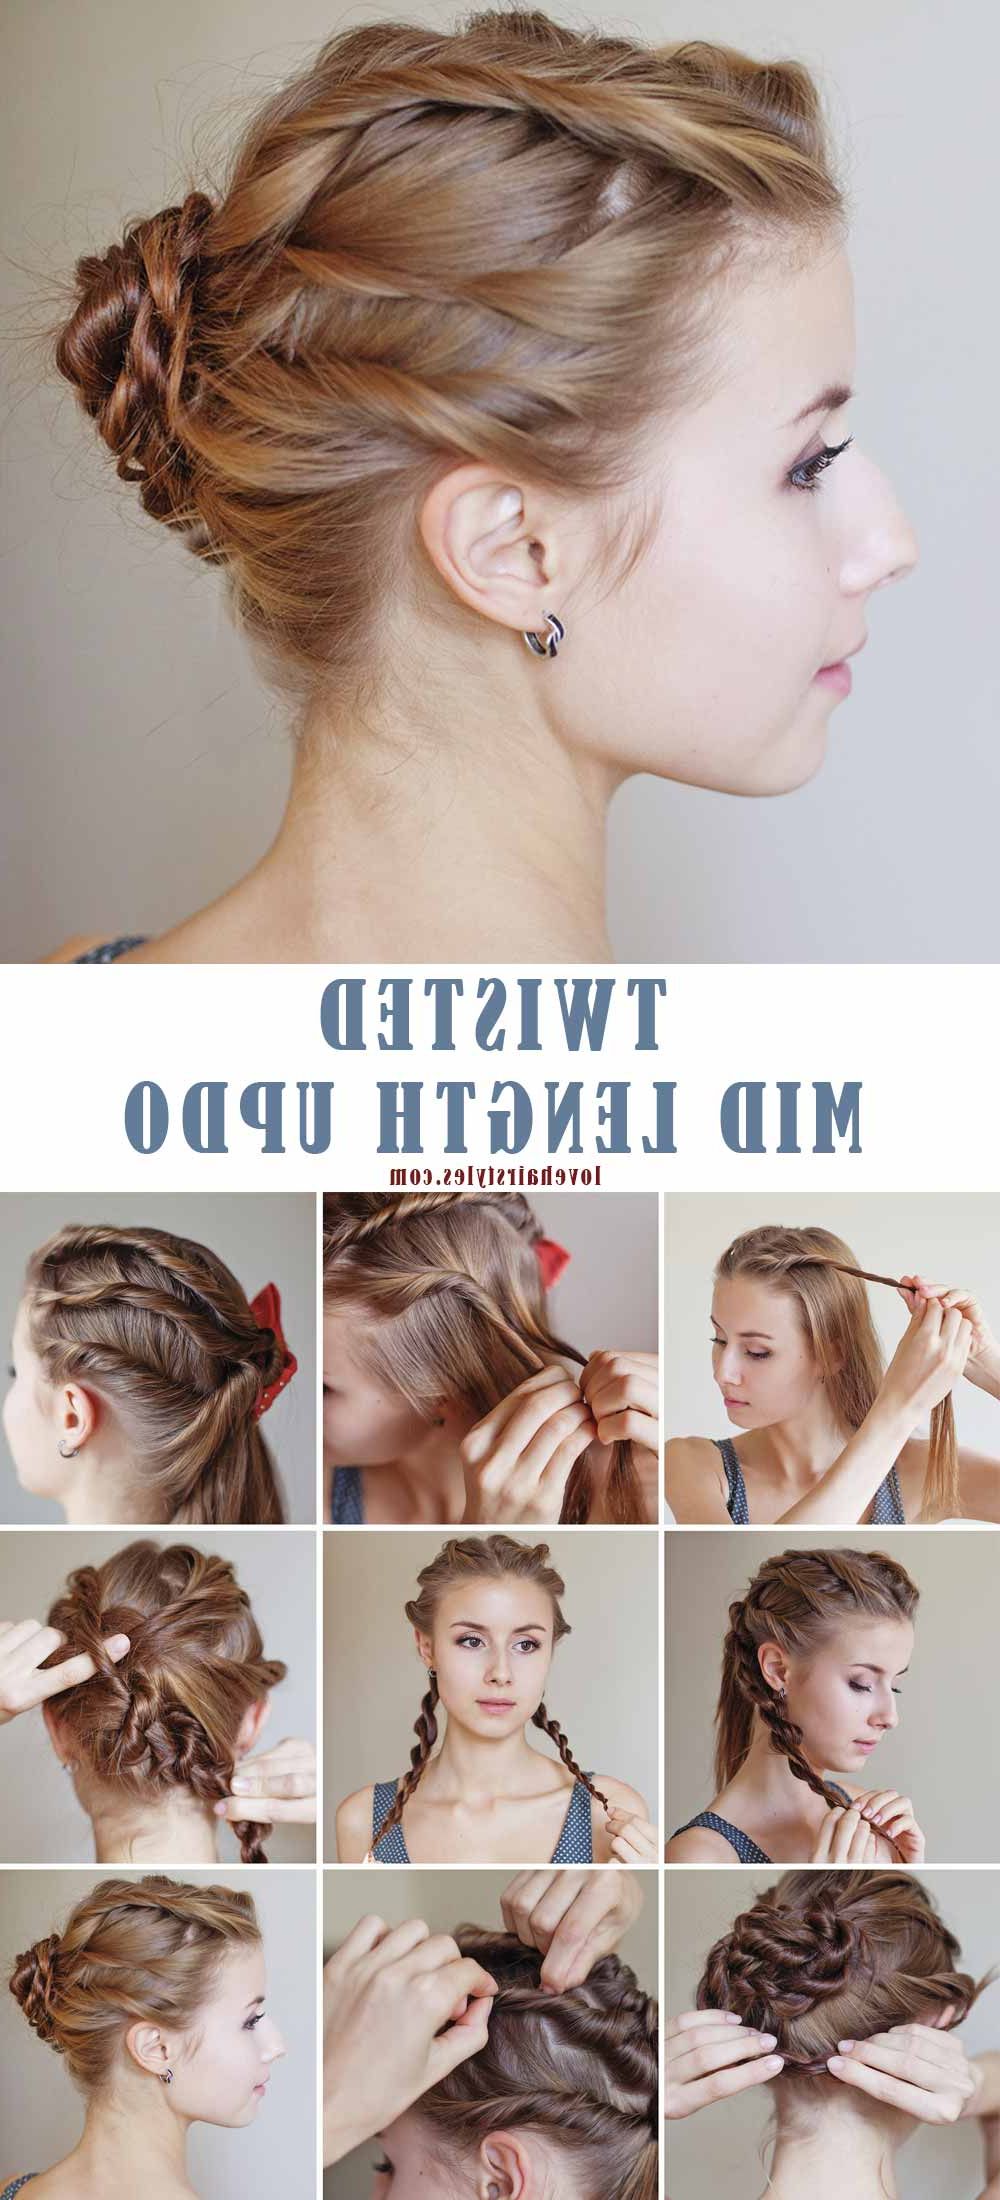 15 Perfectly Easy Hairstyles For Medium Hair – Love Hairstyles Regarding Current Twisted Buns Hairstyles For Your Medium Hair (View 4 of 25)